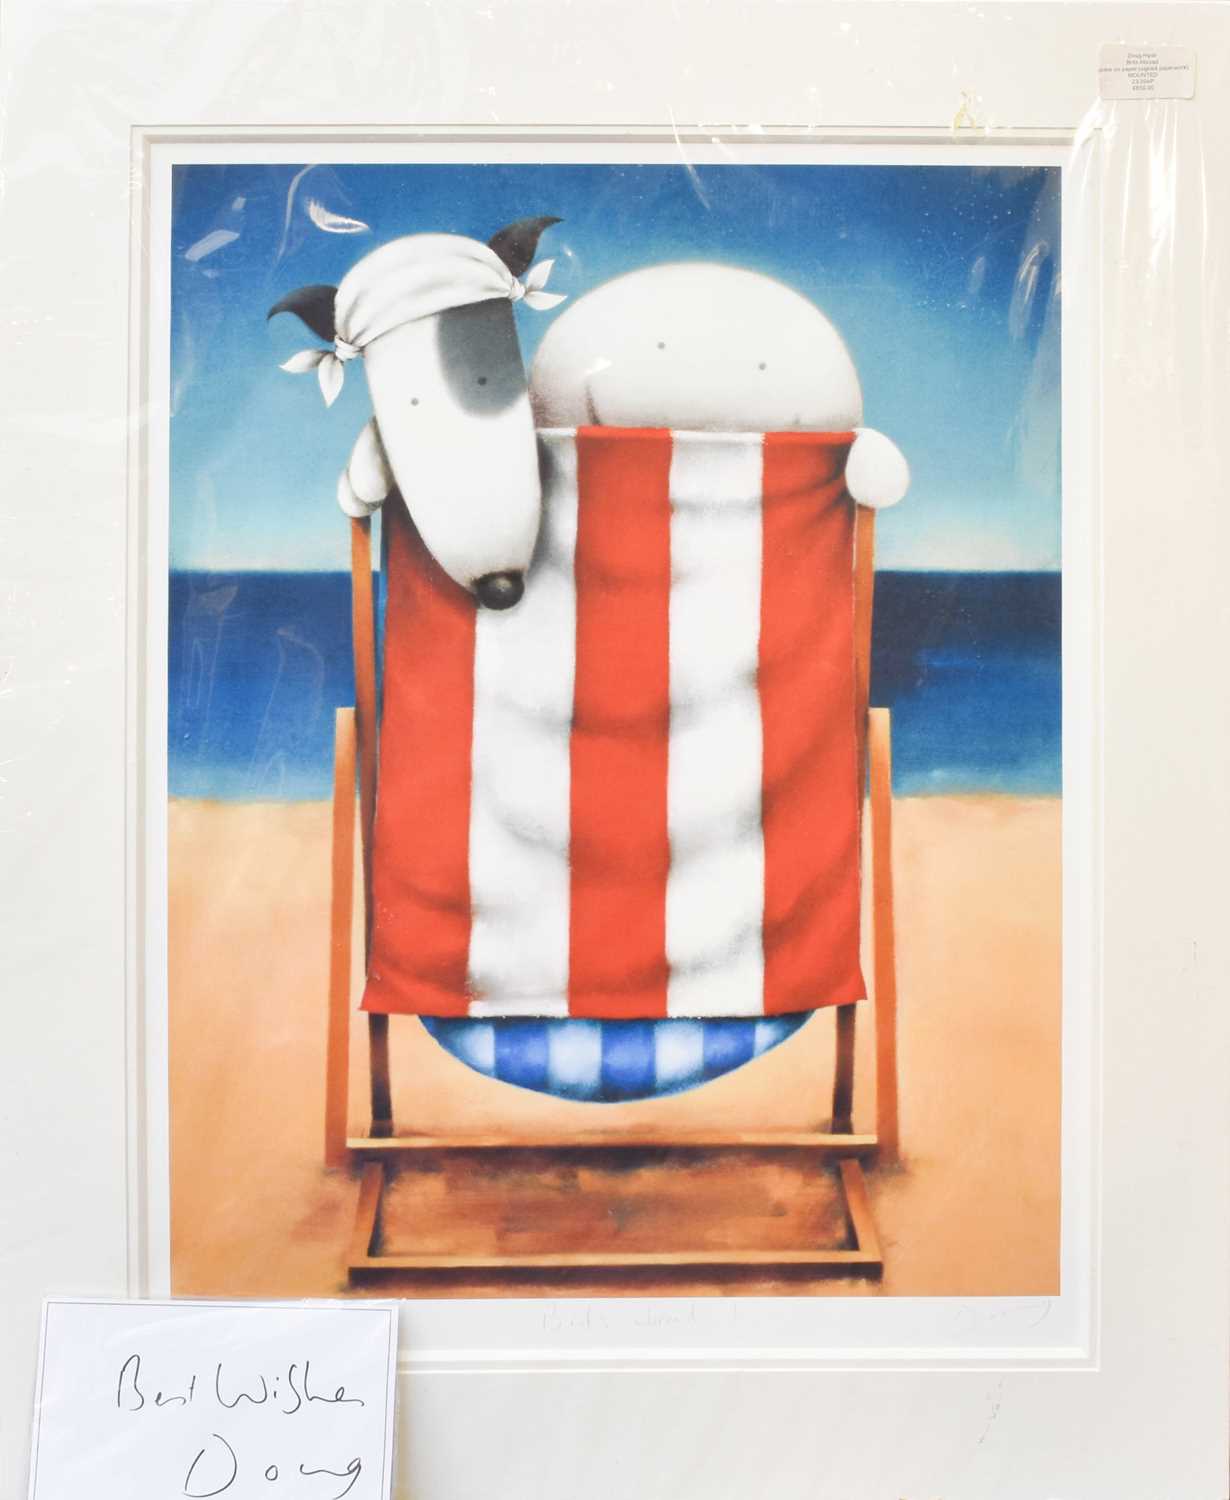 After Doug Hyde (b.1972) "Brits Abroad" Signed, inscribed and numbered artist's proof 23/30, - Image 2 of 2